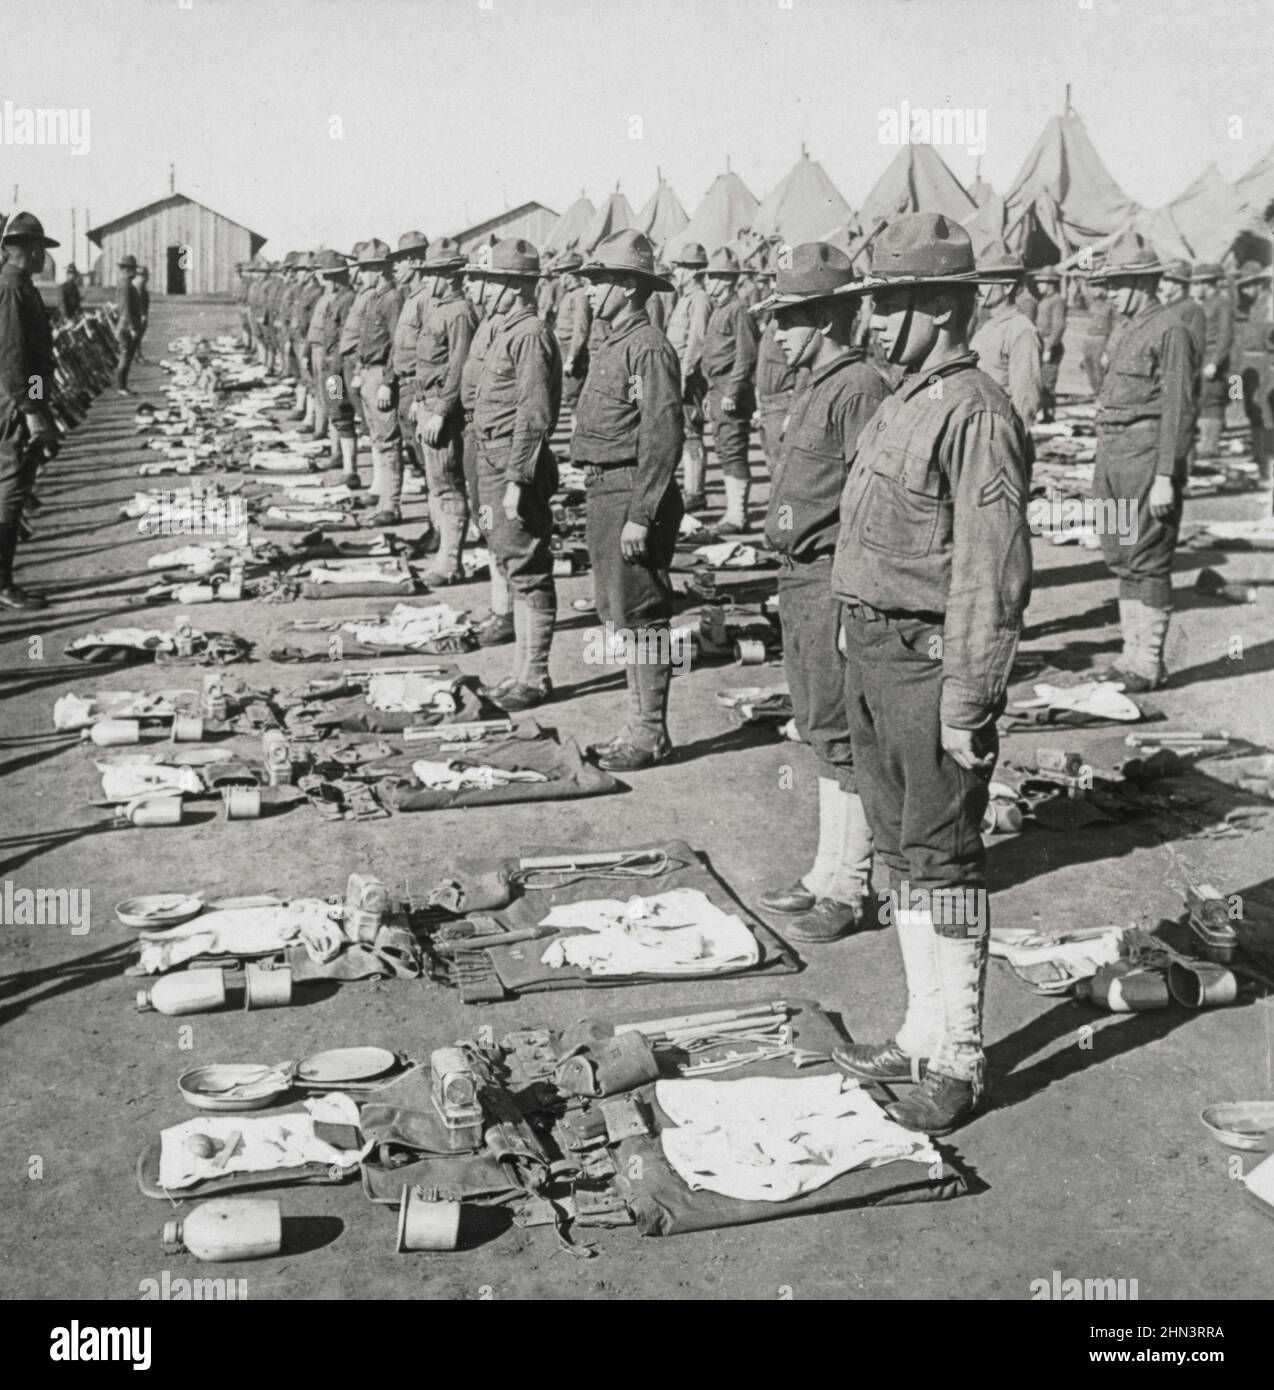 Vintage photo of World War I. 1914-1918. Pack inspection of American 139th infantry regiment,  American Army Camp. U.S.A. Stock Photo